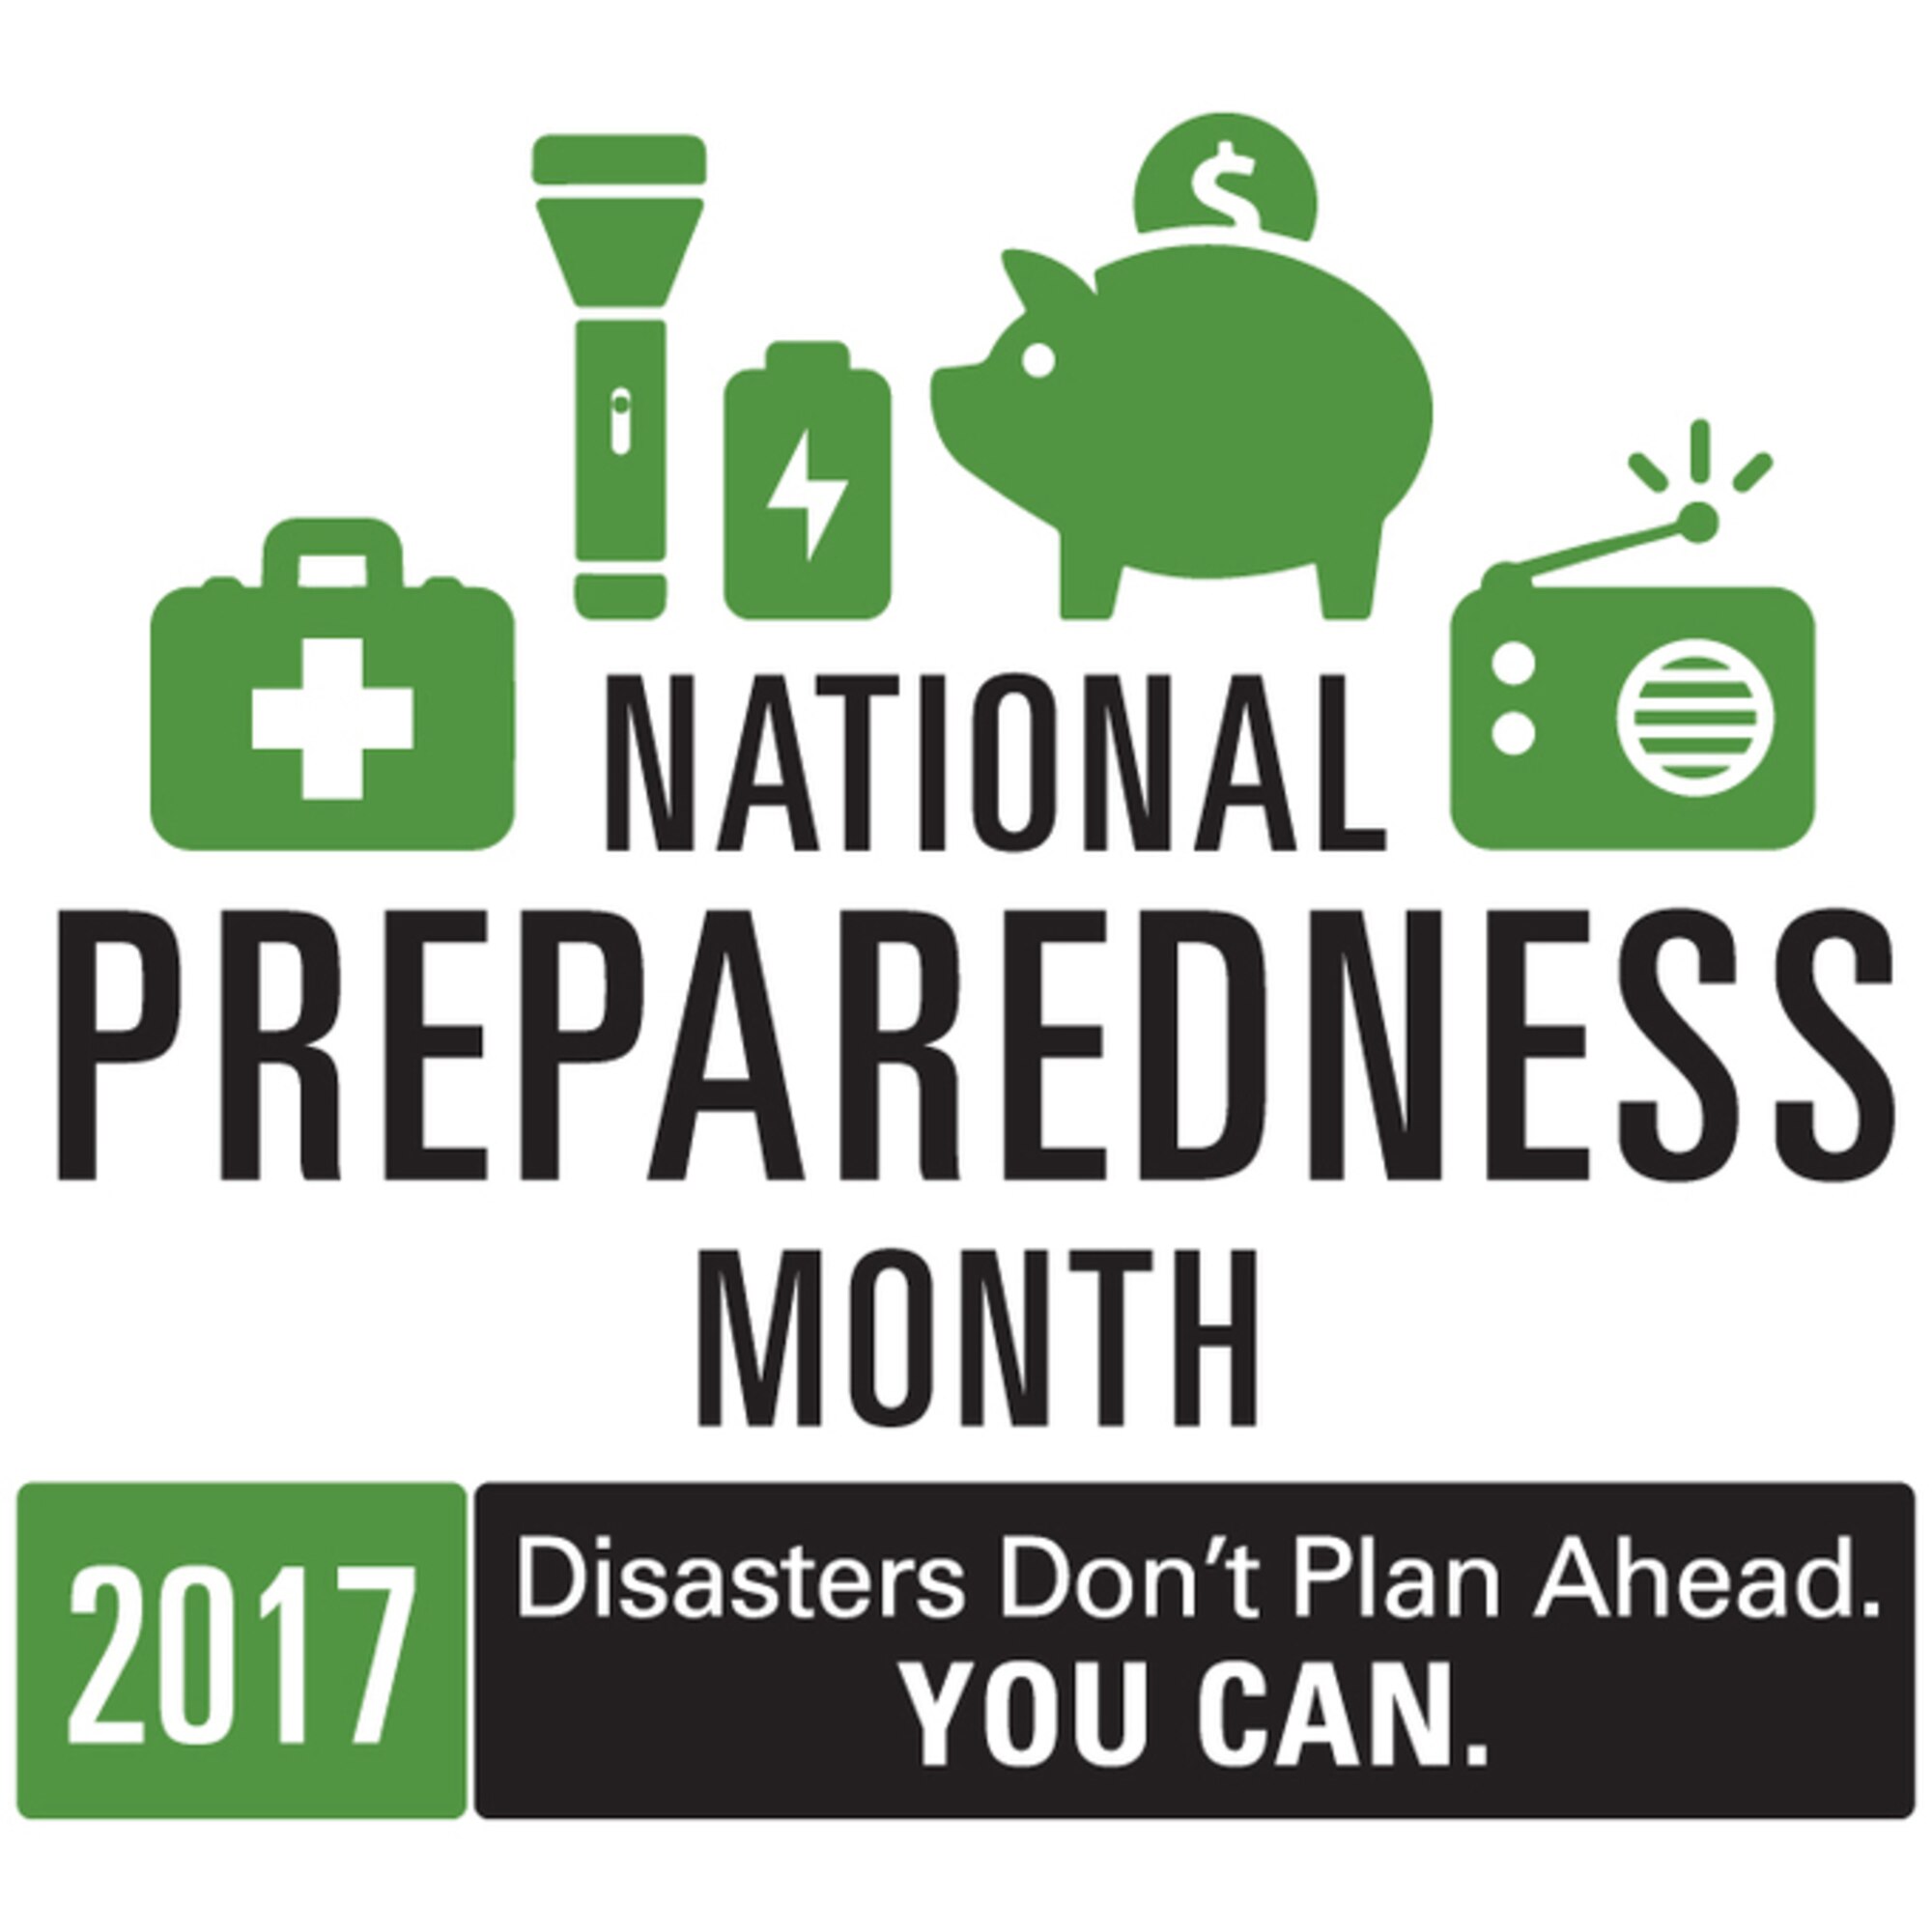 Each week of the month is dedicated to a specific preparedness-based theme, accompanied by a set of skills that can be used by service members and their families to remain ready for various emergency scenarios.